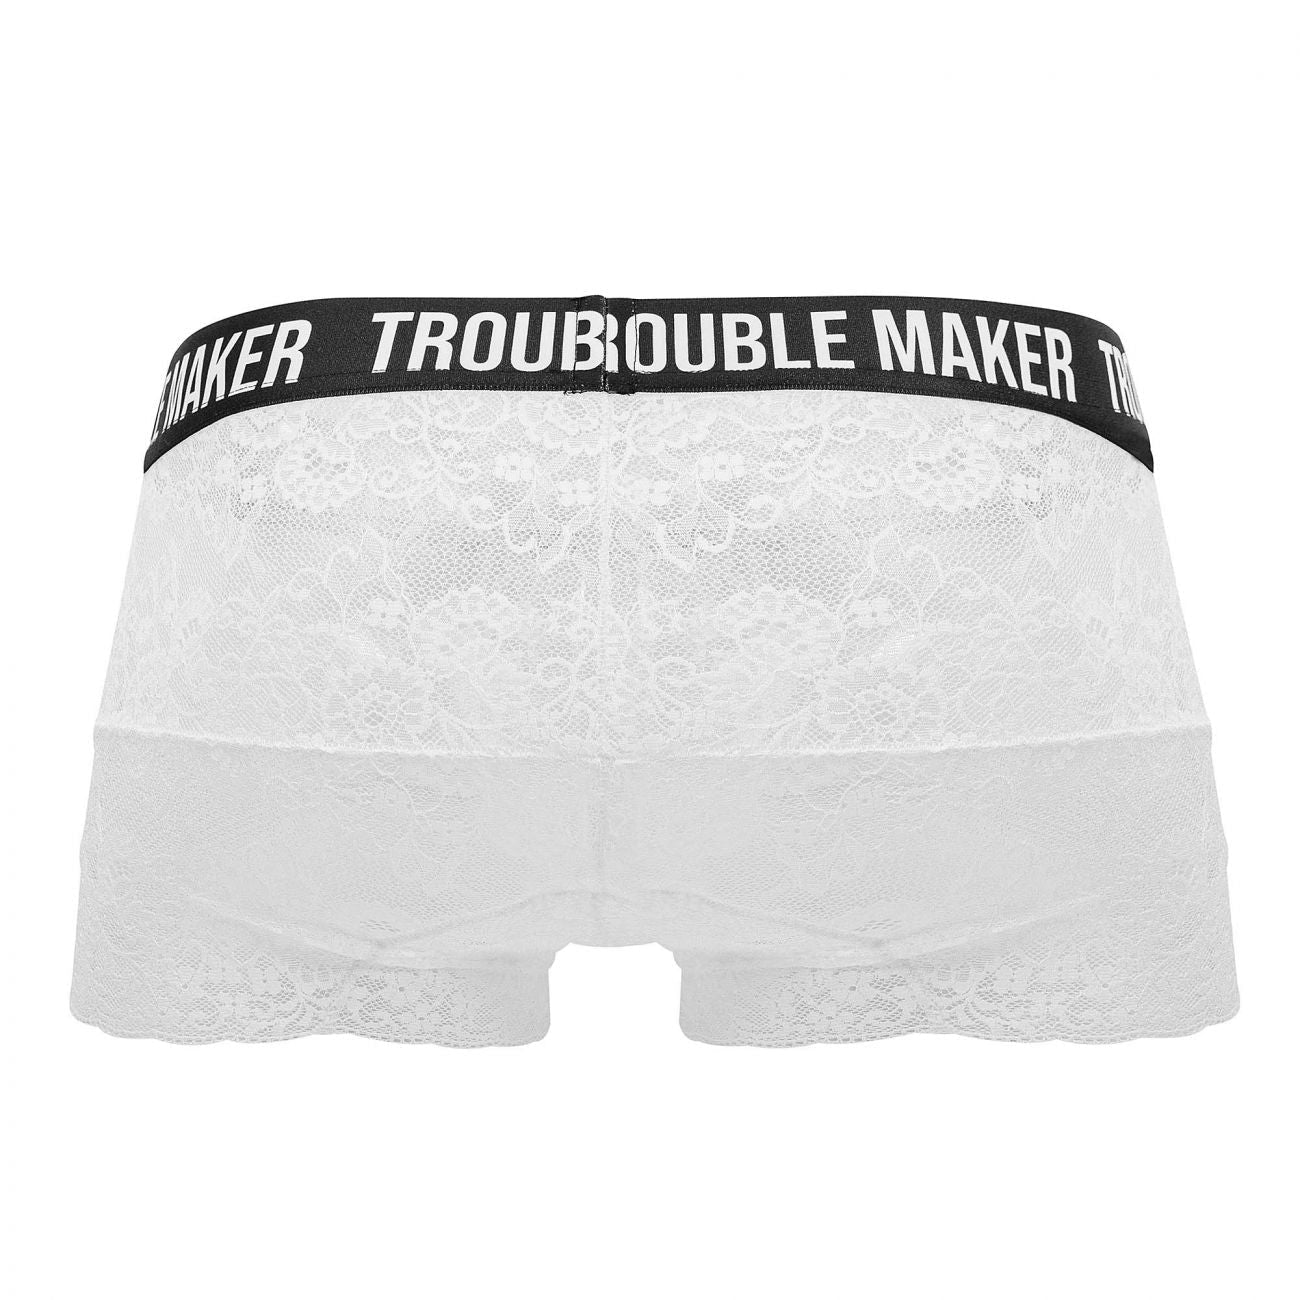 CandyMan 99616 Trouble Maker Lace Trunks White